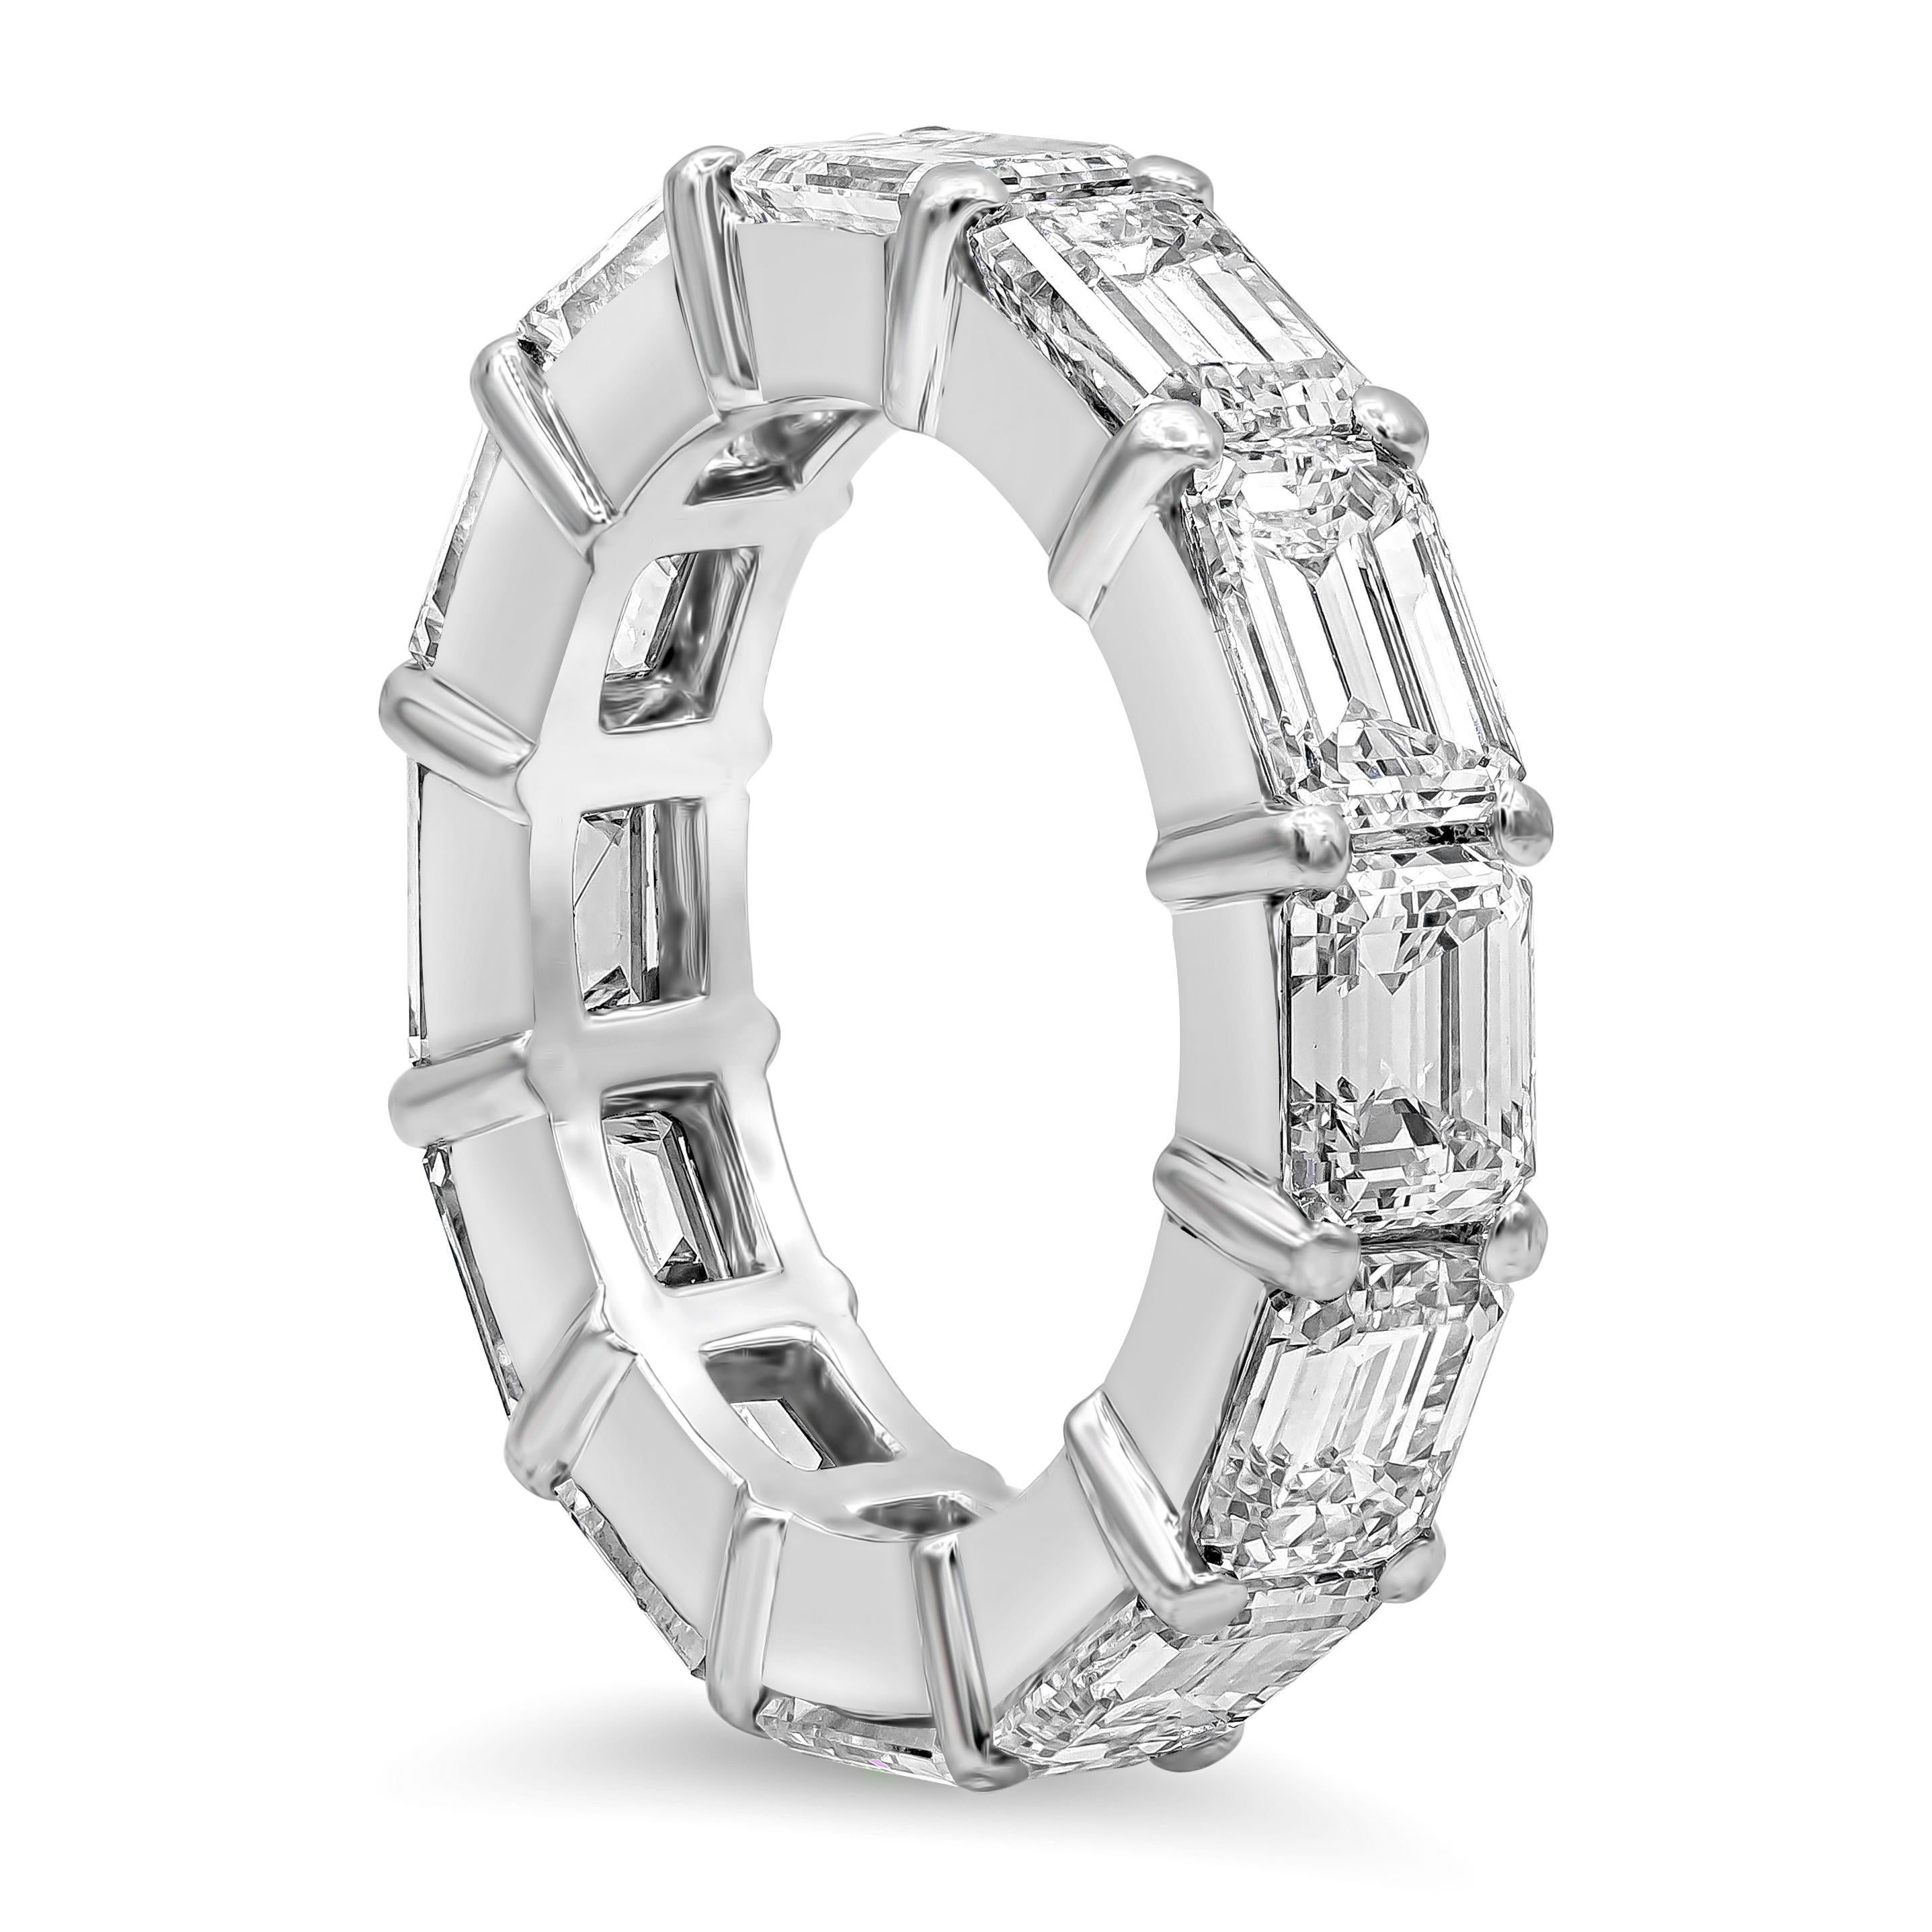 Features a row of emerald cut diamonds set in an elegant, horizontal fashion weighing 8.75 carats total, E-F Color. Set in a shared-prong setting, Made in Platinum, Size 6.25 US resizable upon request and 4.5mm in width.

Style available in